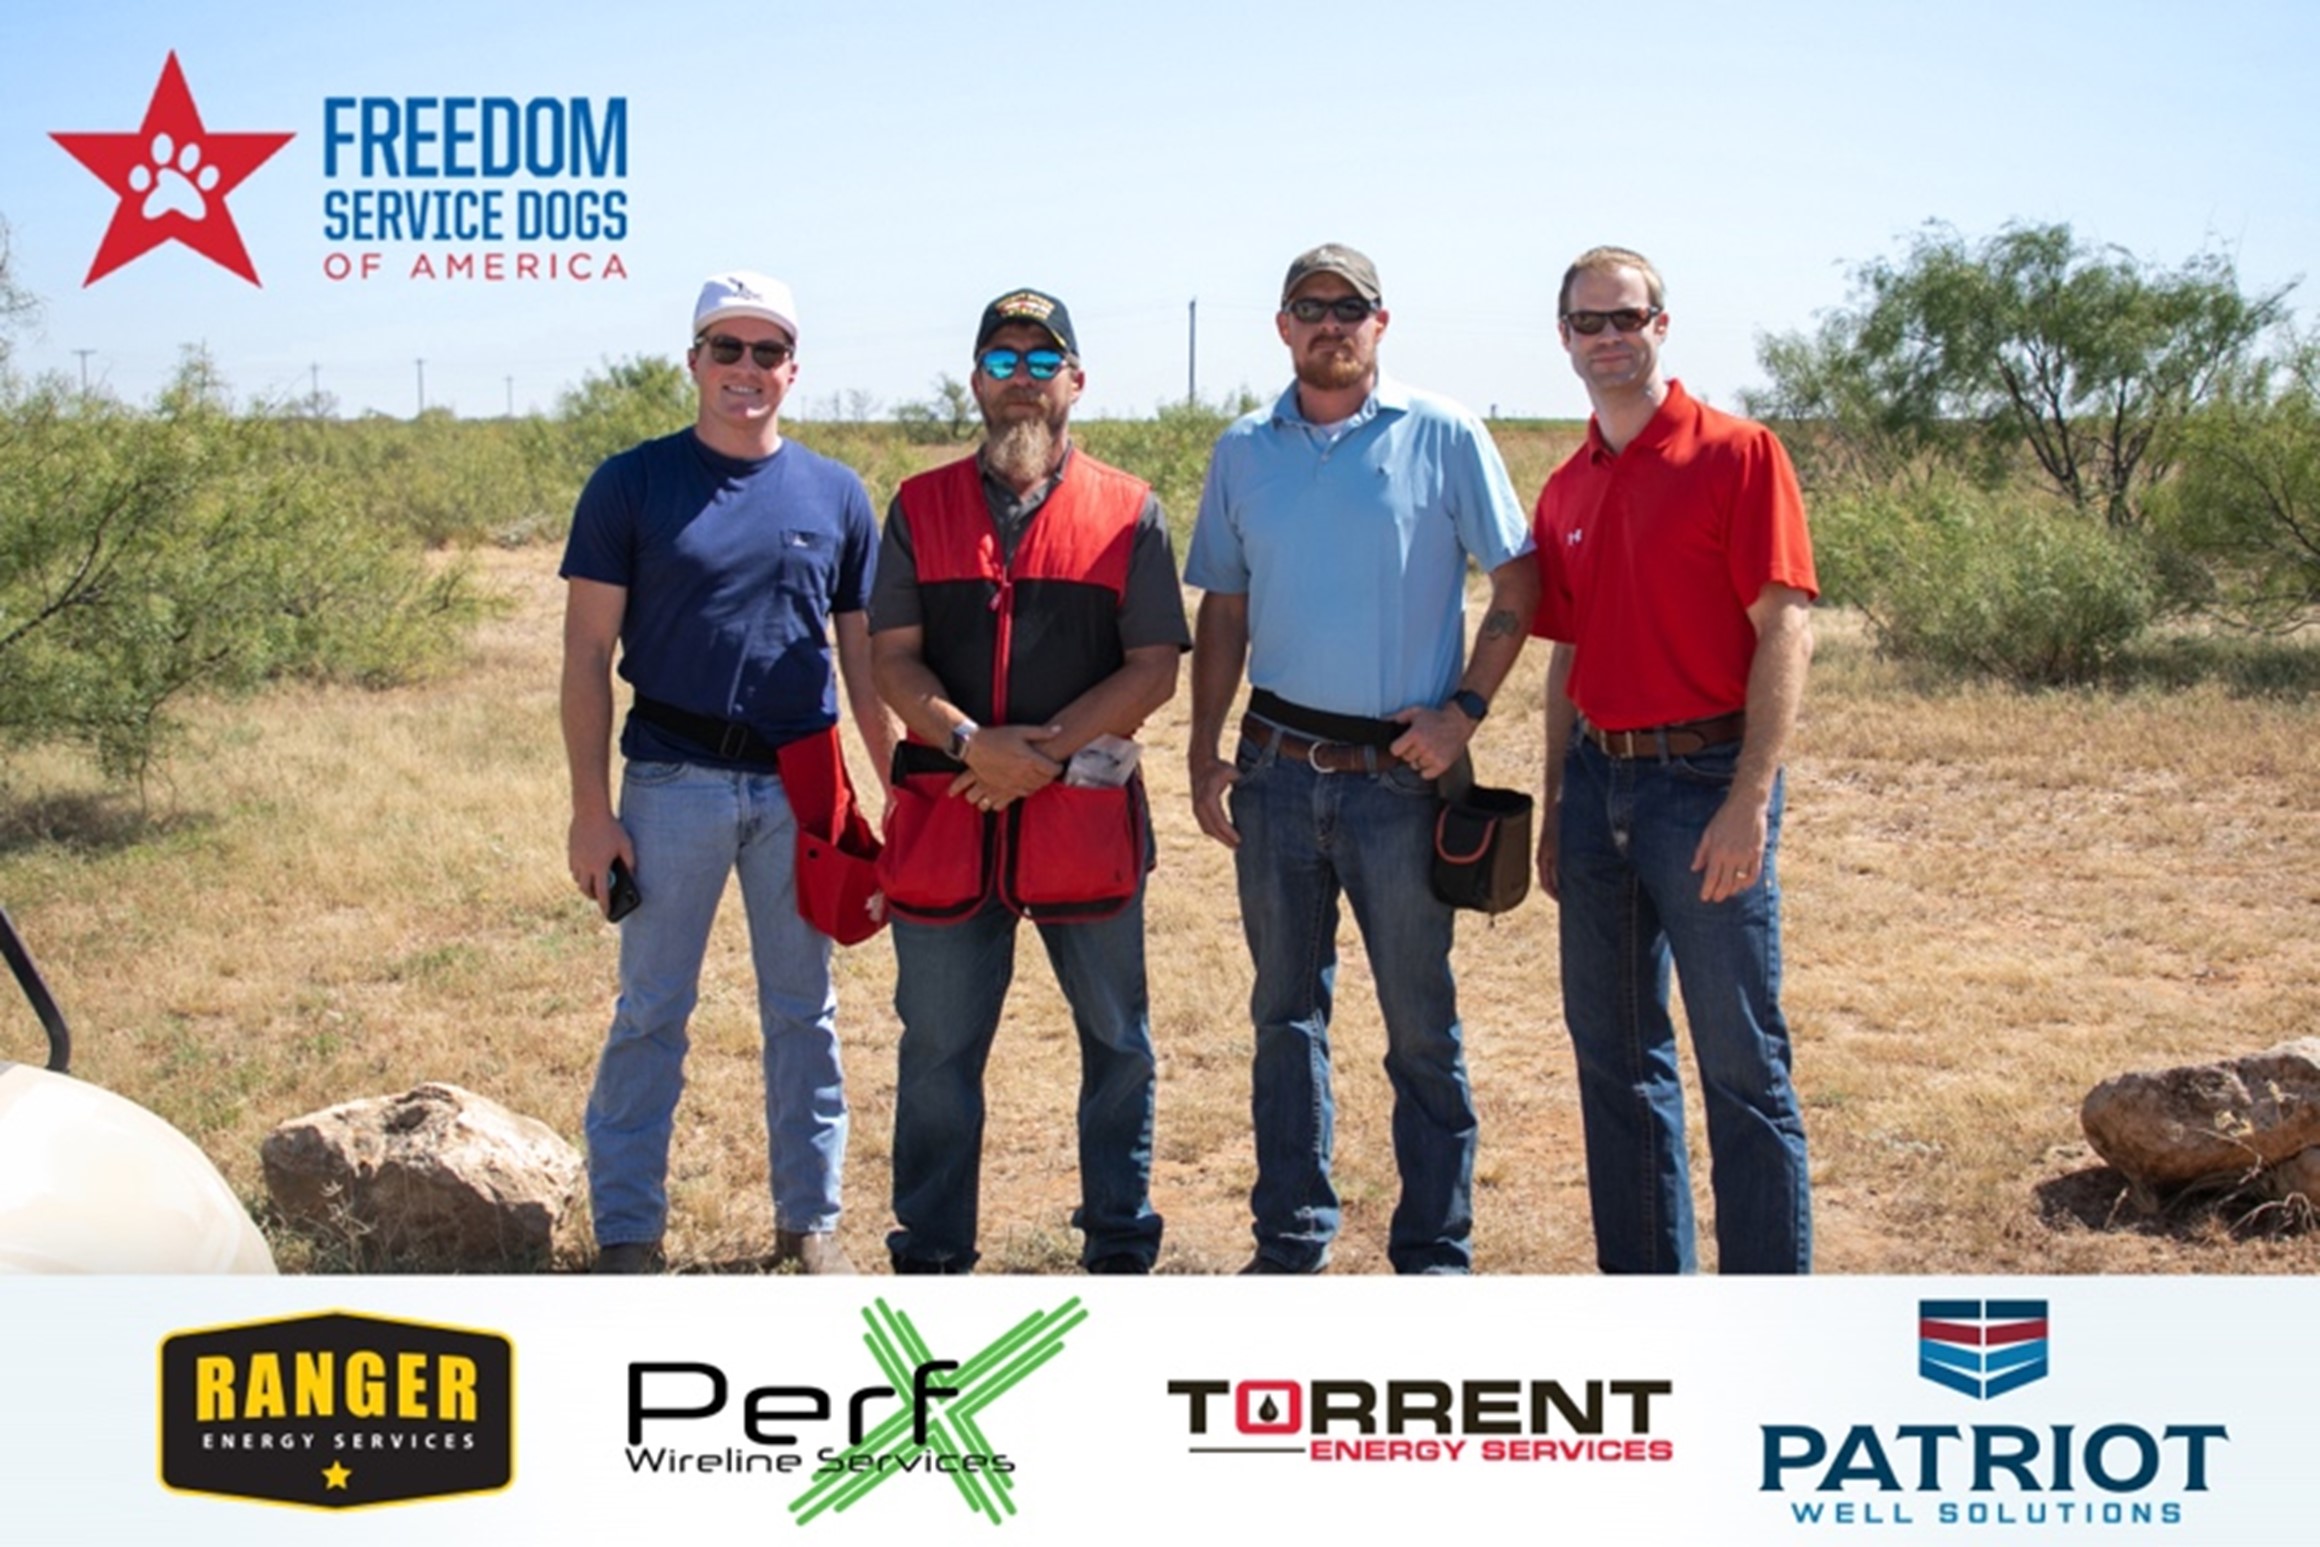 Torrent participates with Ranger Energy Services at Freedom Service Dogs of America Charity event